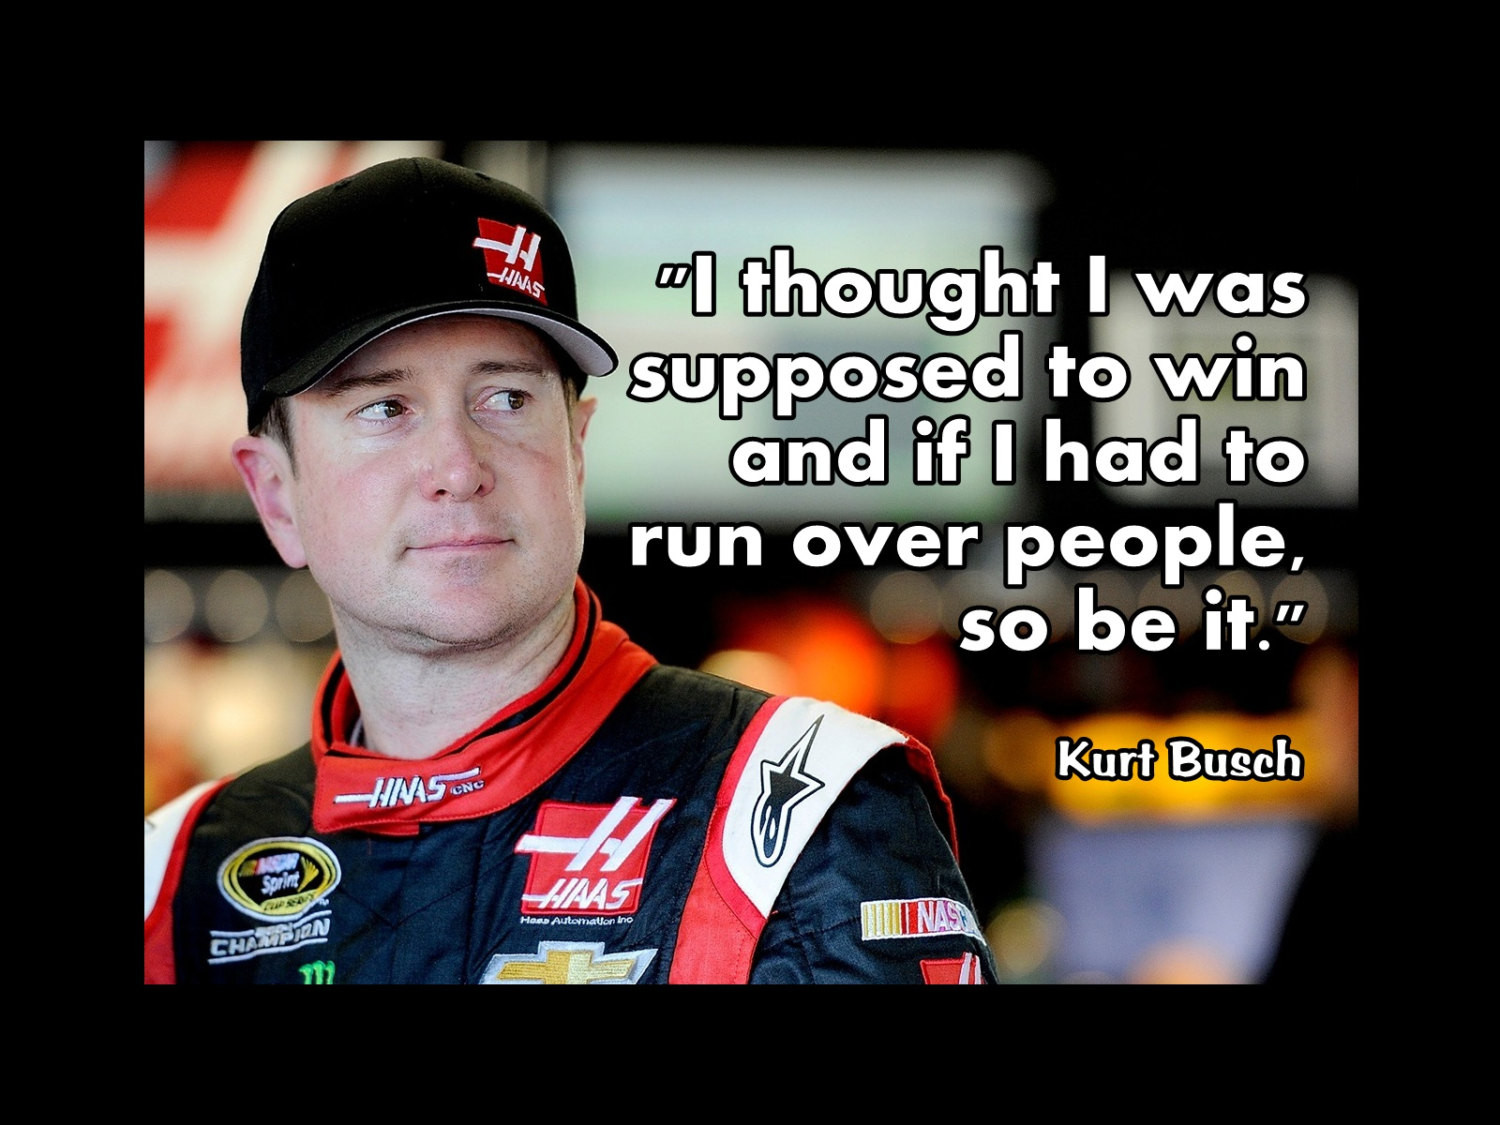 Funny Nascar Quotes
 Quotes By Nascar Drivers QuotesGram